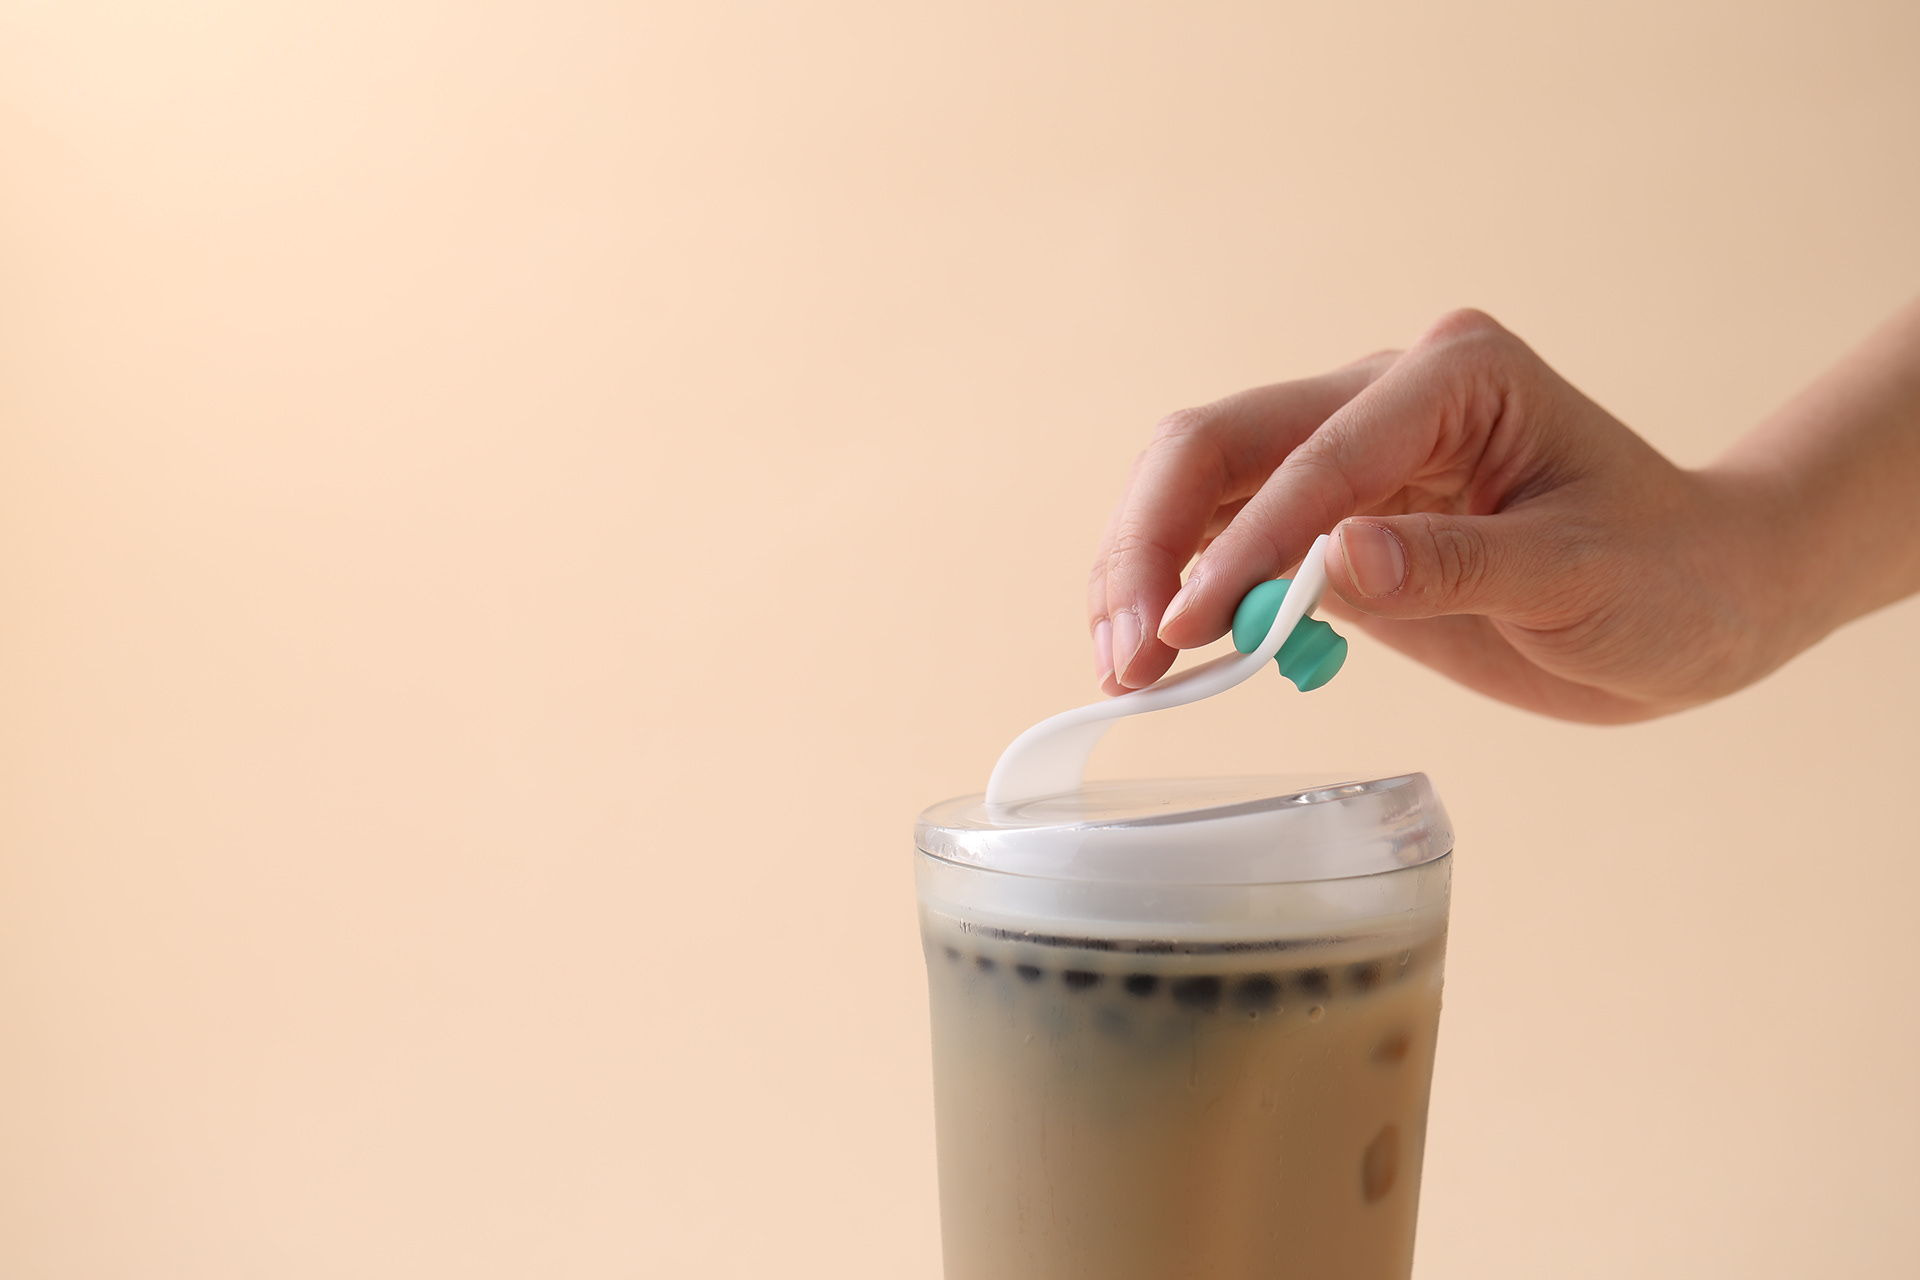 Reinventing the Bubble Tea Glass Cup, no straw needed.